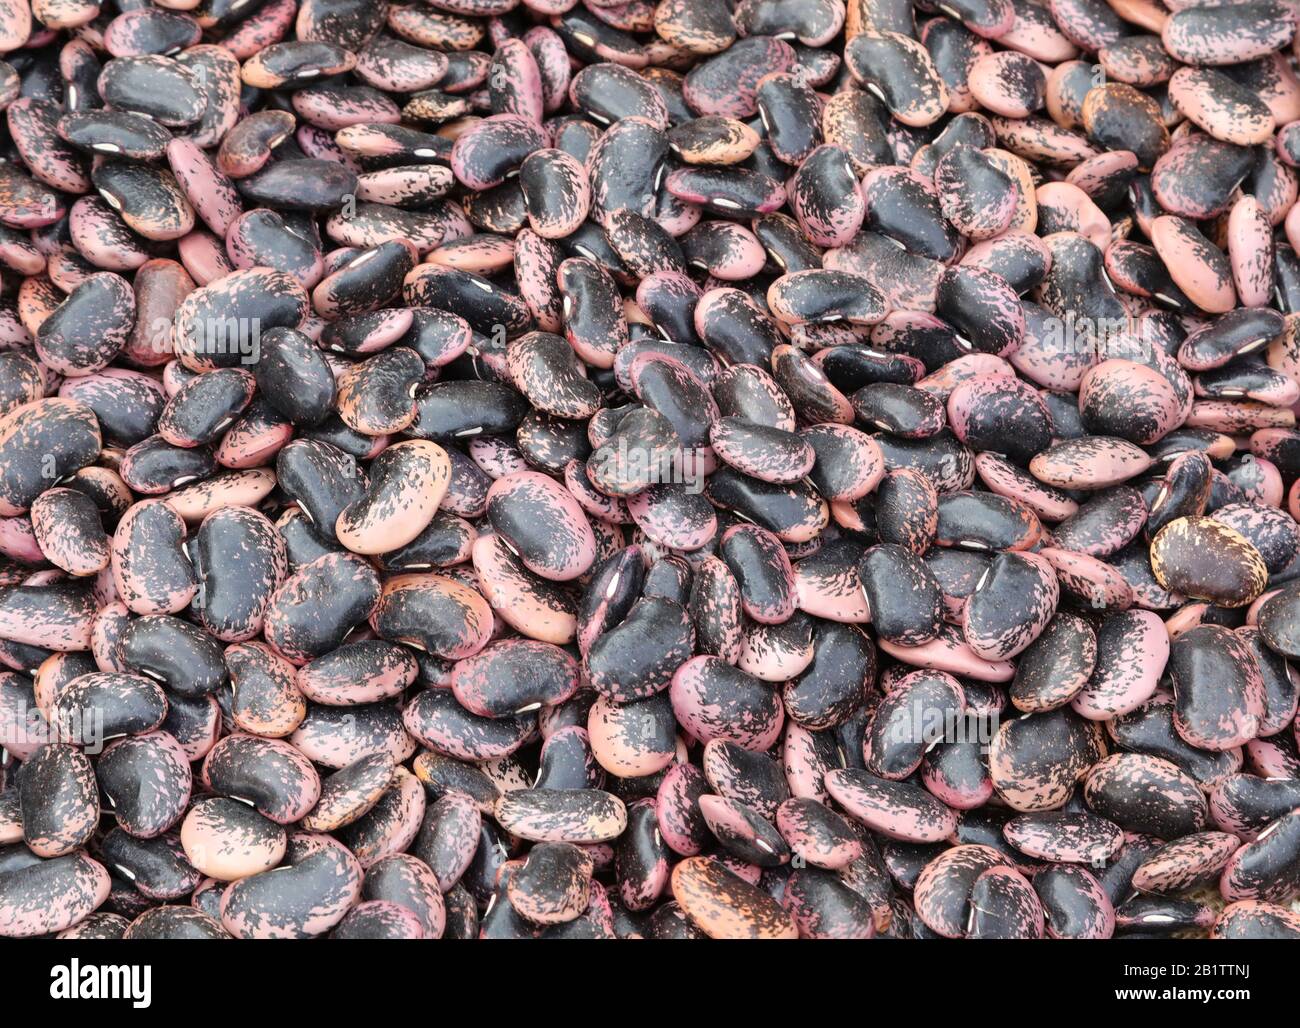 beans called in Italian FAGIOLI DEL DIAVOLO which means the DEvil beans for sale in vegetable market Stock Photo